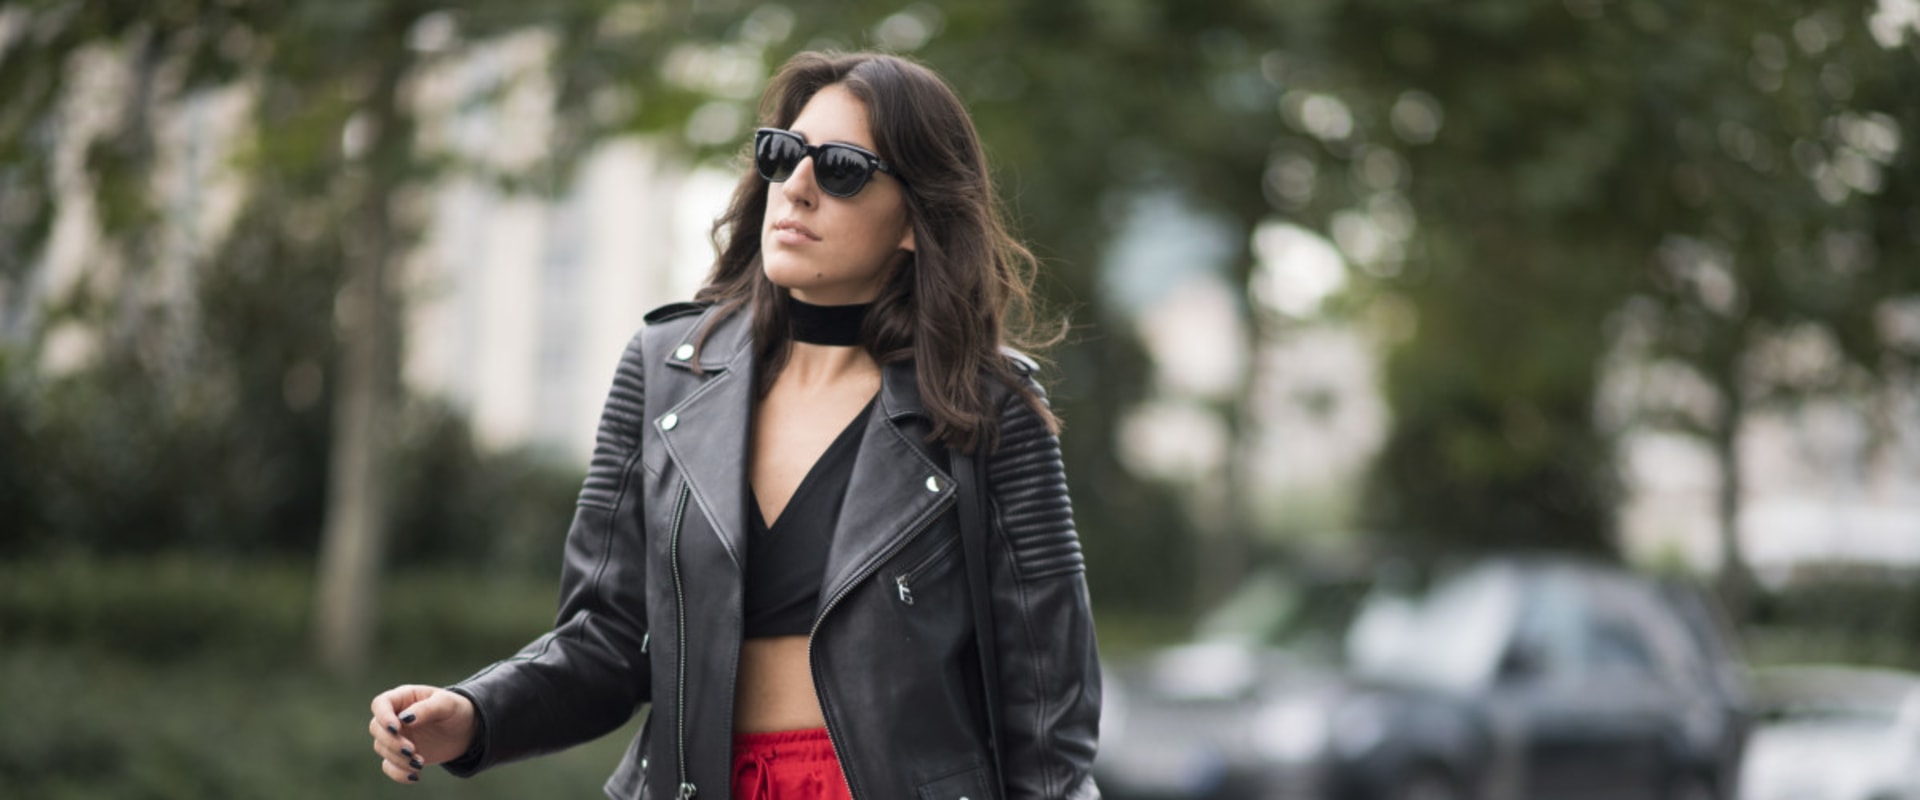 Styling with Leather Pieces: An Overview